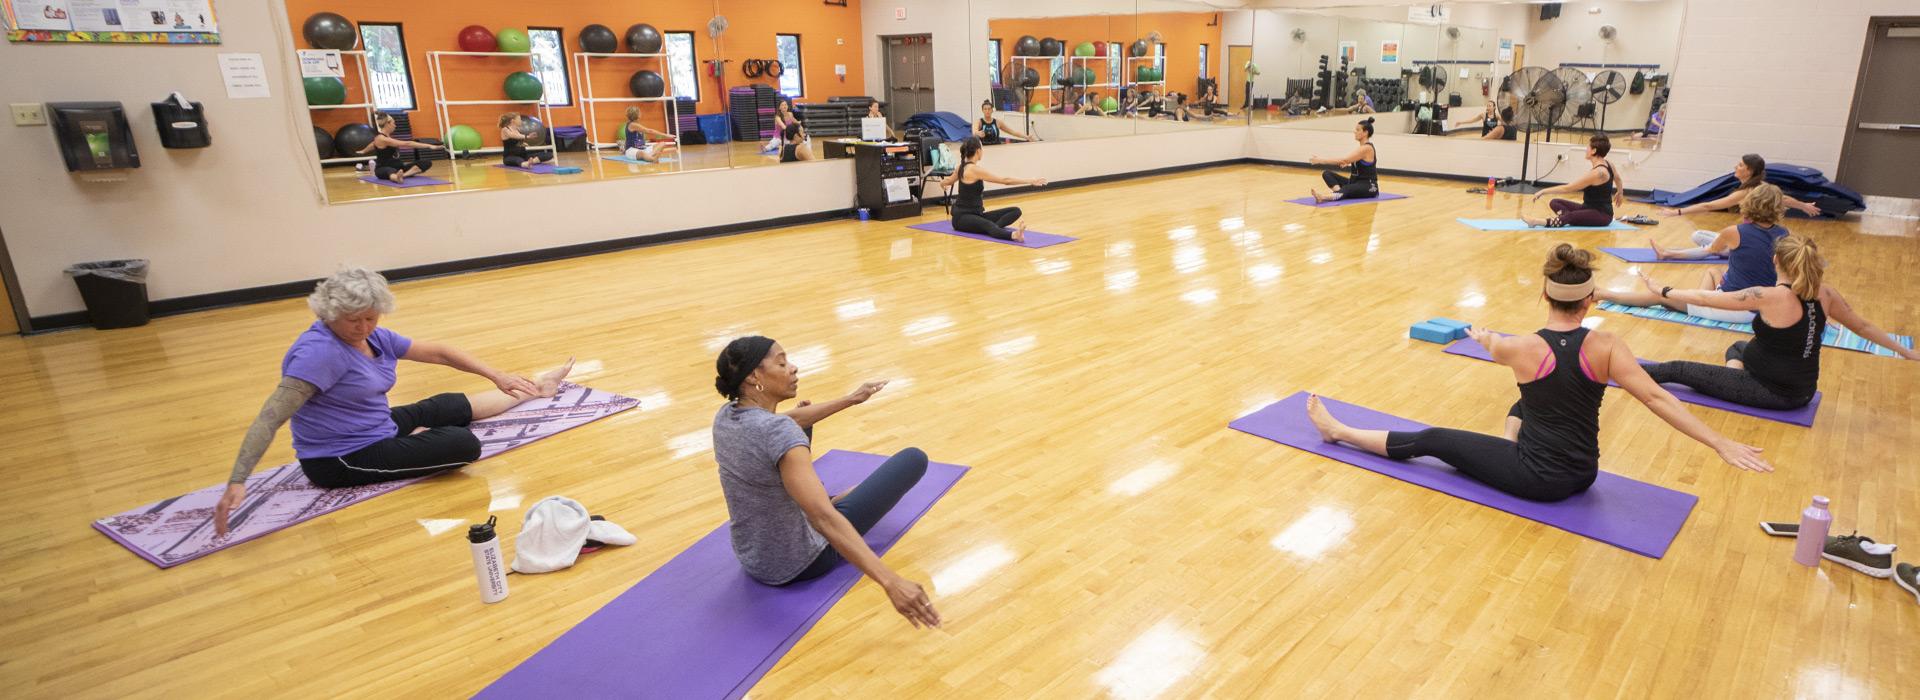 YMCA members participating in a Yoga class at the Albemarle Family YMCA